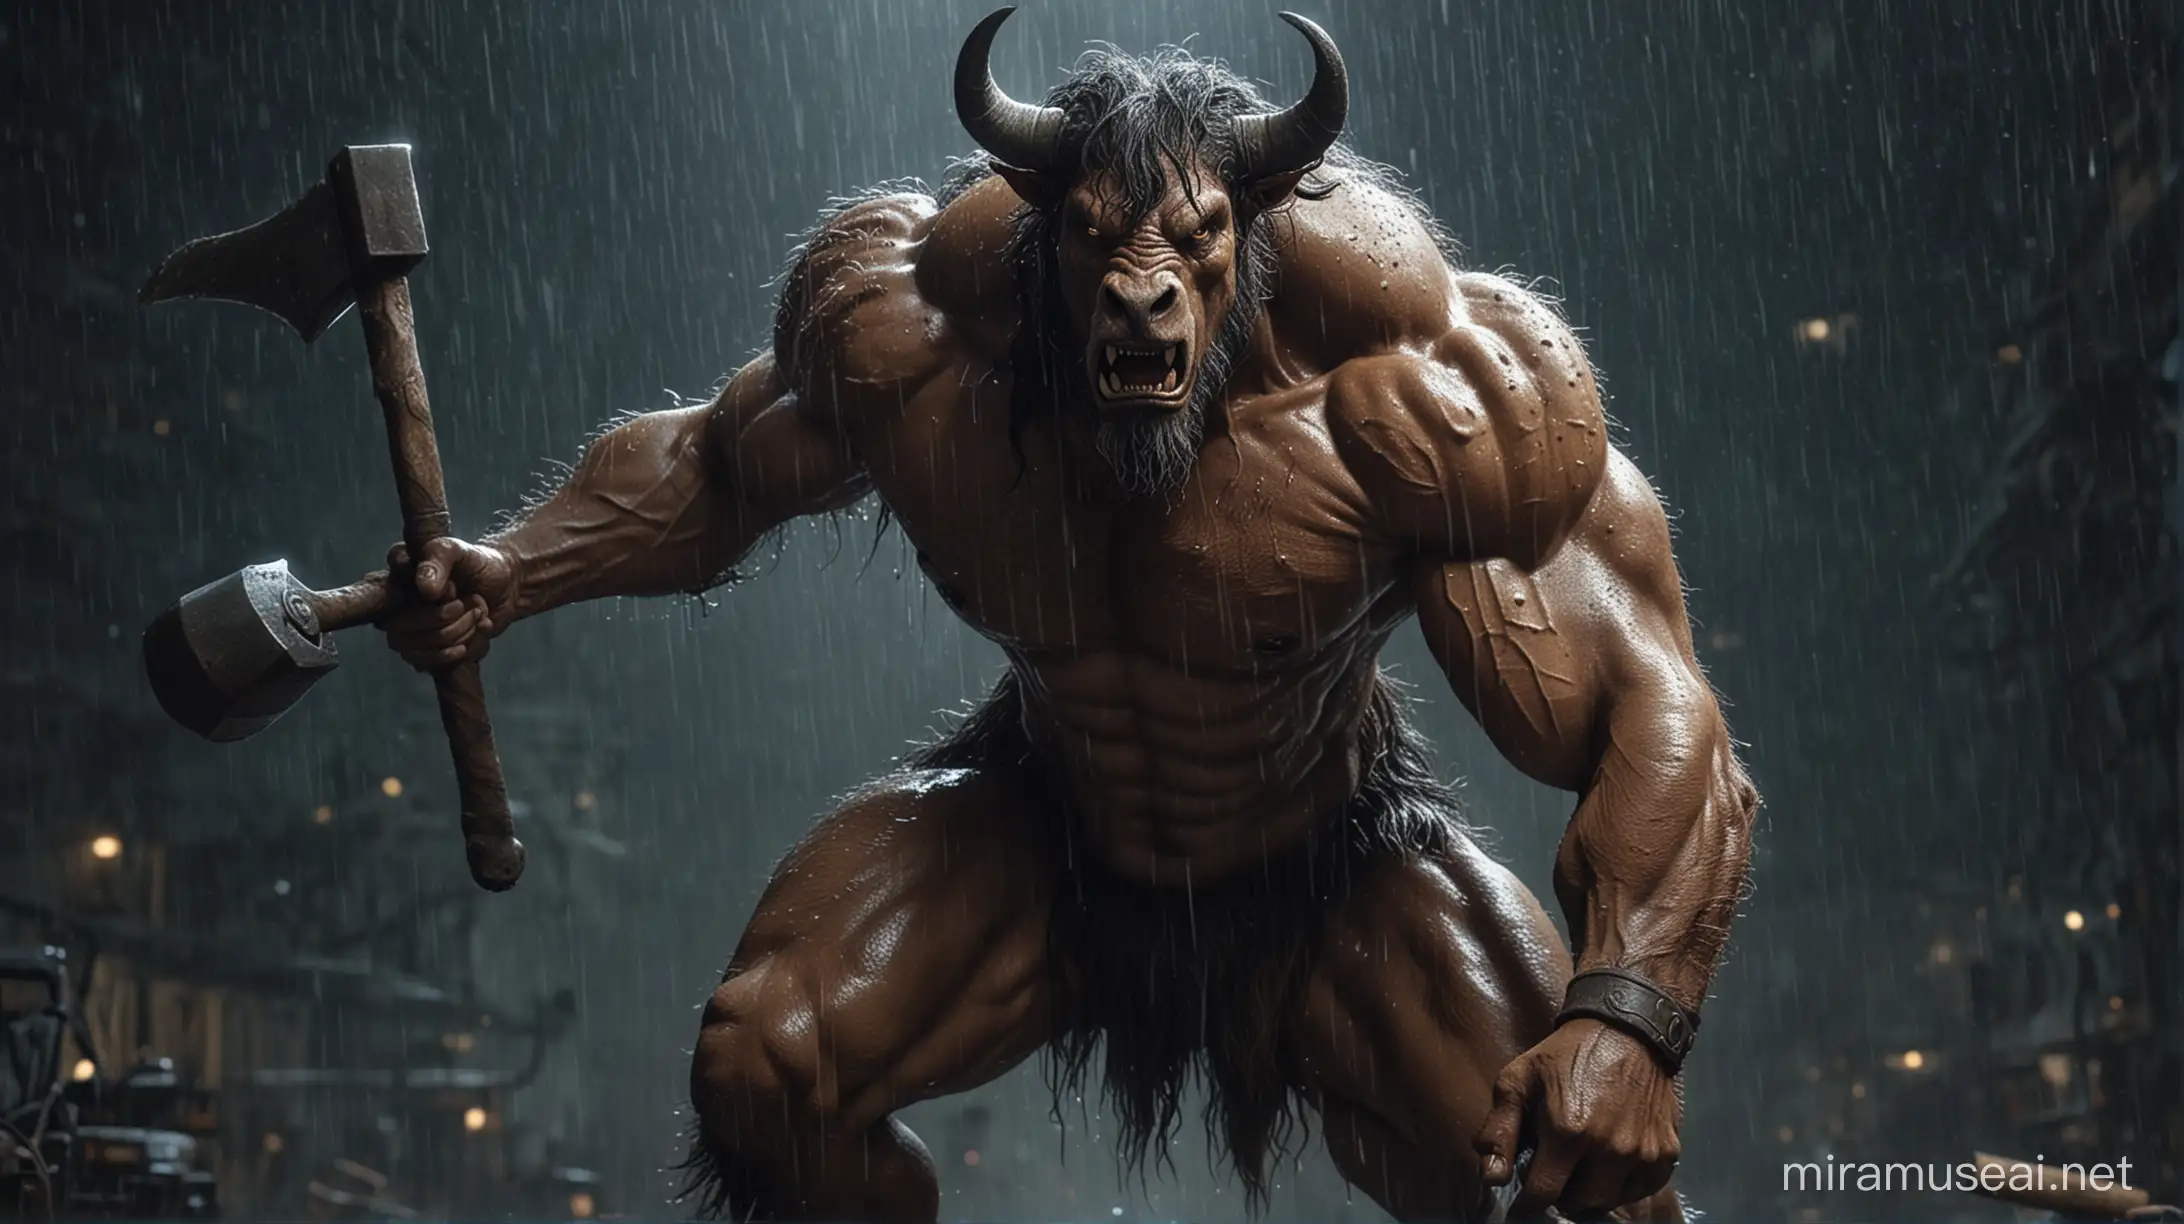 A Centaur, huge physique, very very aggressive, attacking with a hammer, expressive face, detailed eyes, cinematic looks, on a midnight, raining